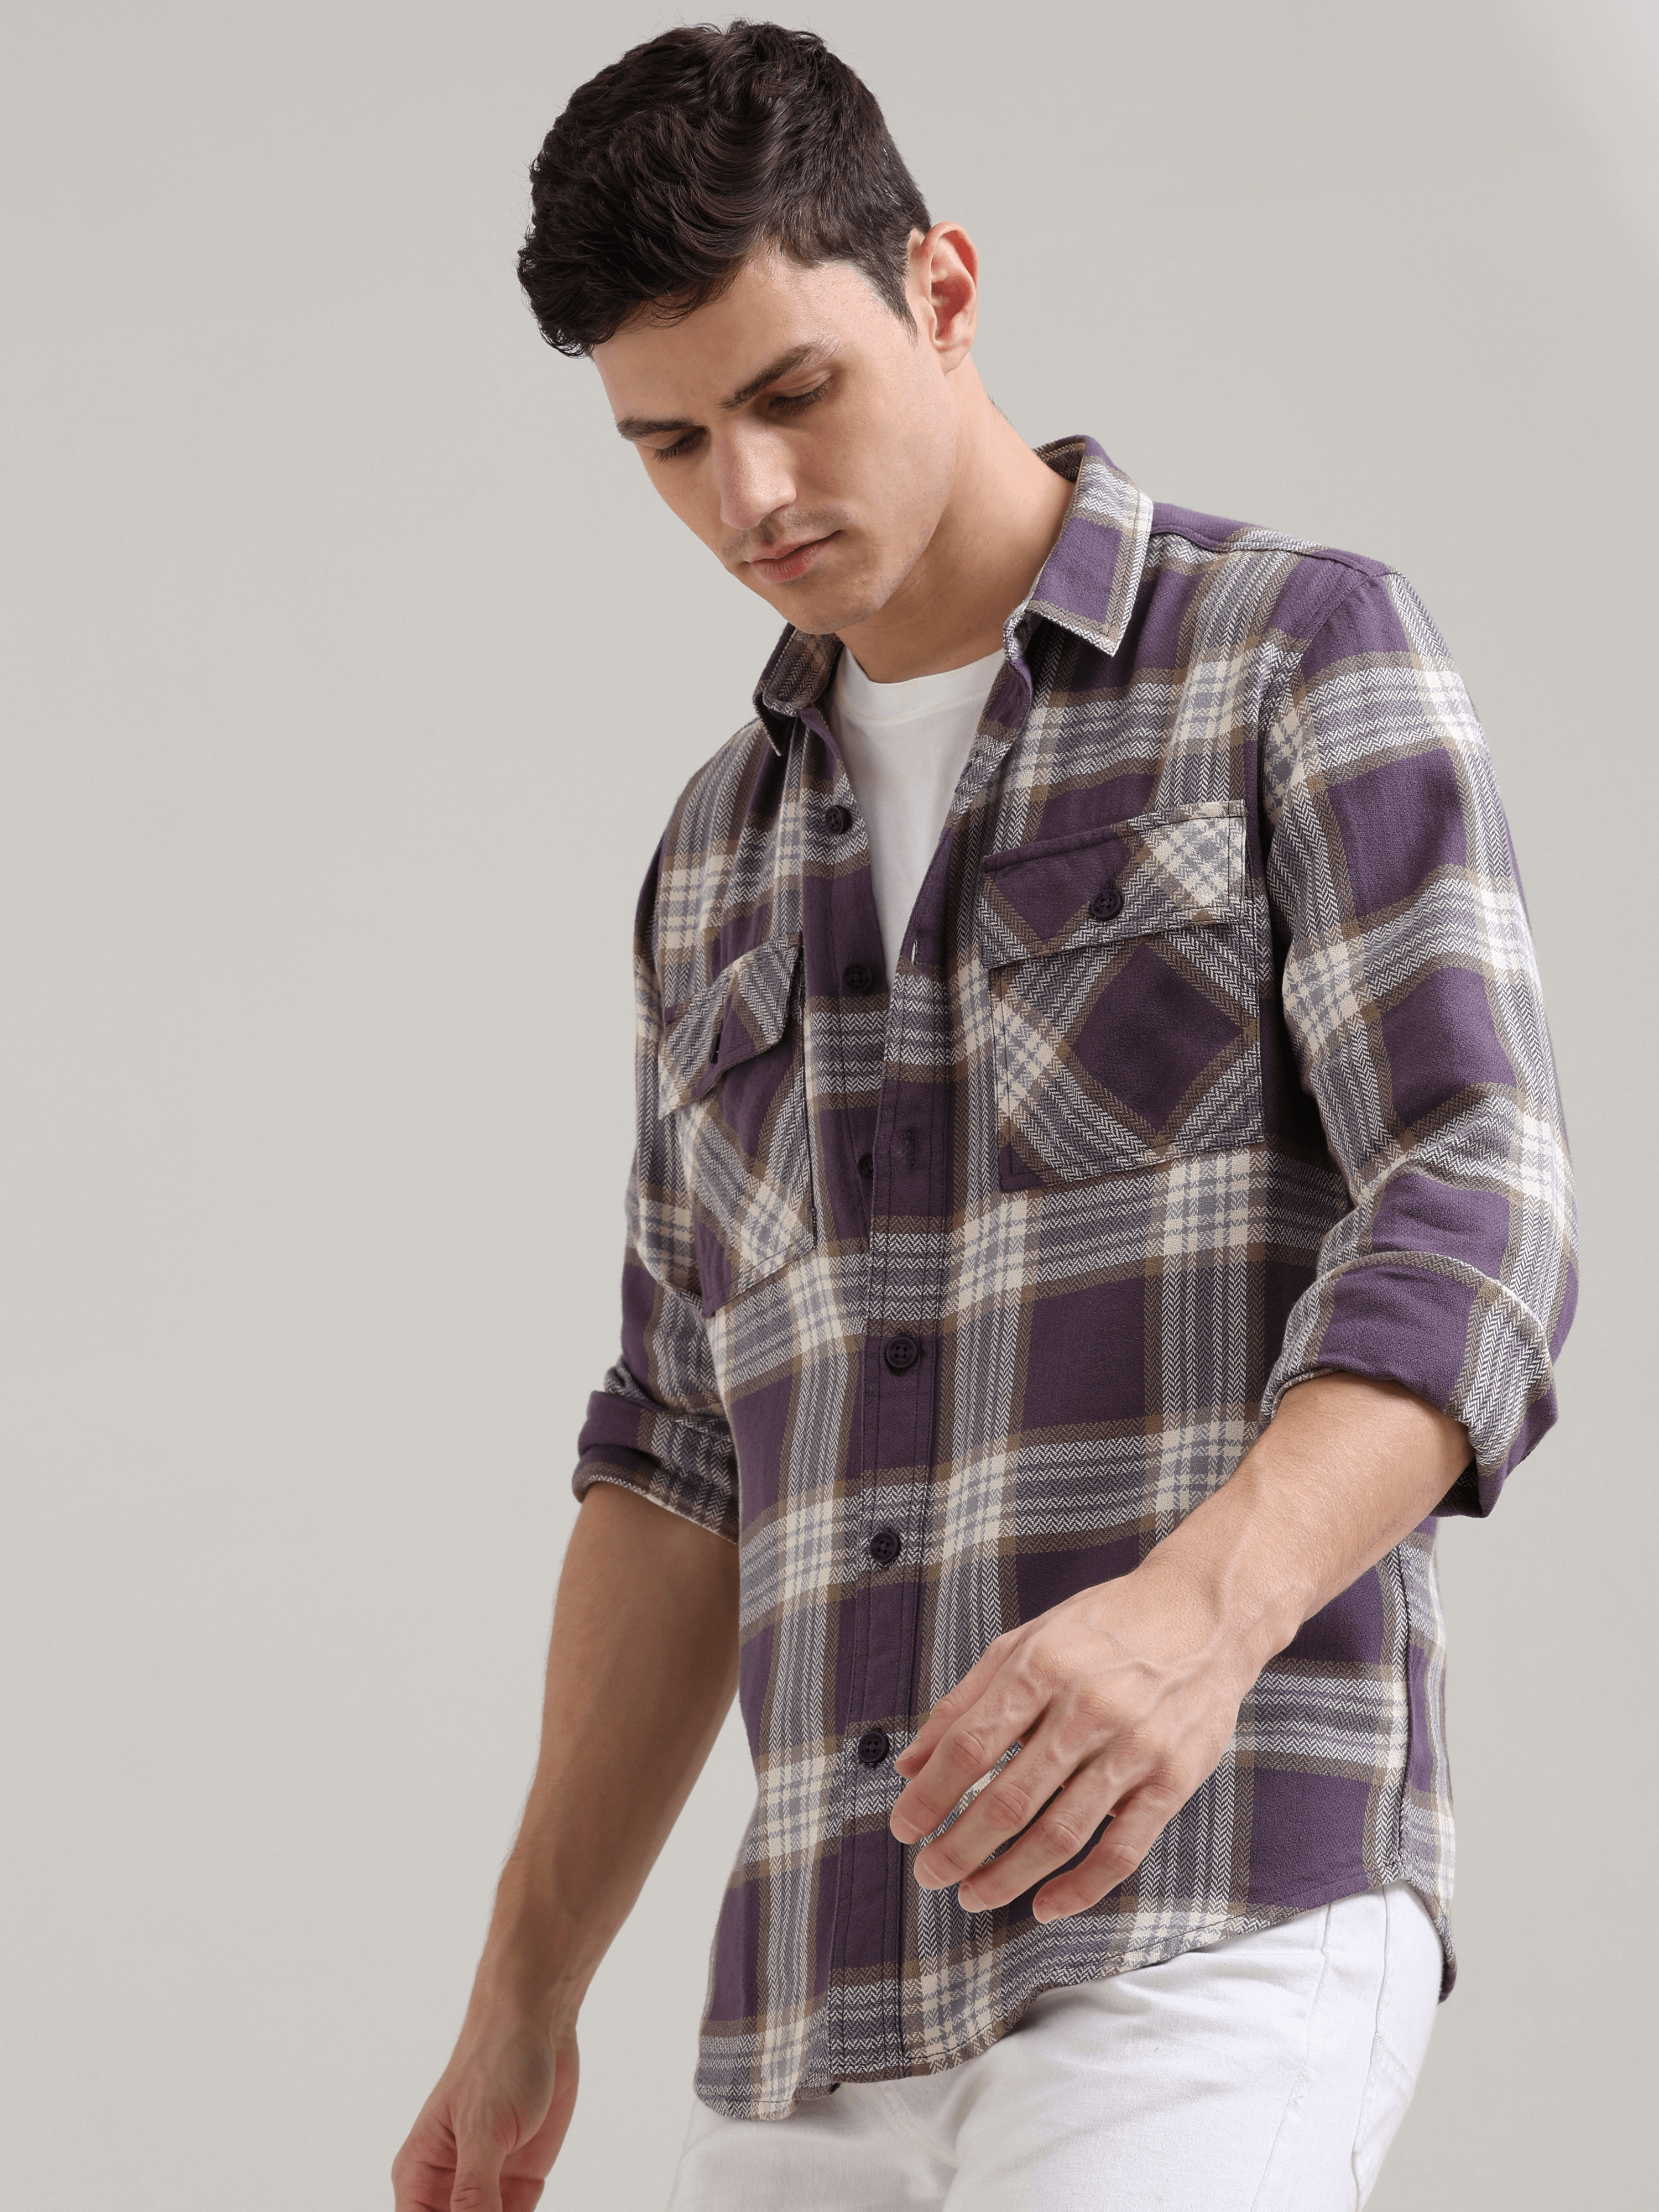 Midnight plum Cream Casual Check Shirt shop online at Estilocus. 100% Cotton • Full-sleeve check shirt• Cut and sew placket• Regular collar• Double button edge cuff• Double pocket with flap• Curved bottom hemline .• All double needle construction, finest